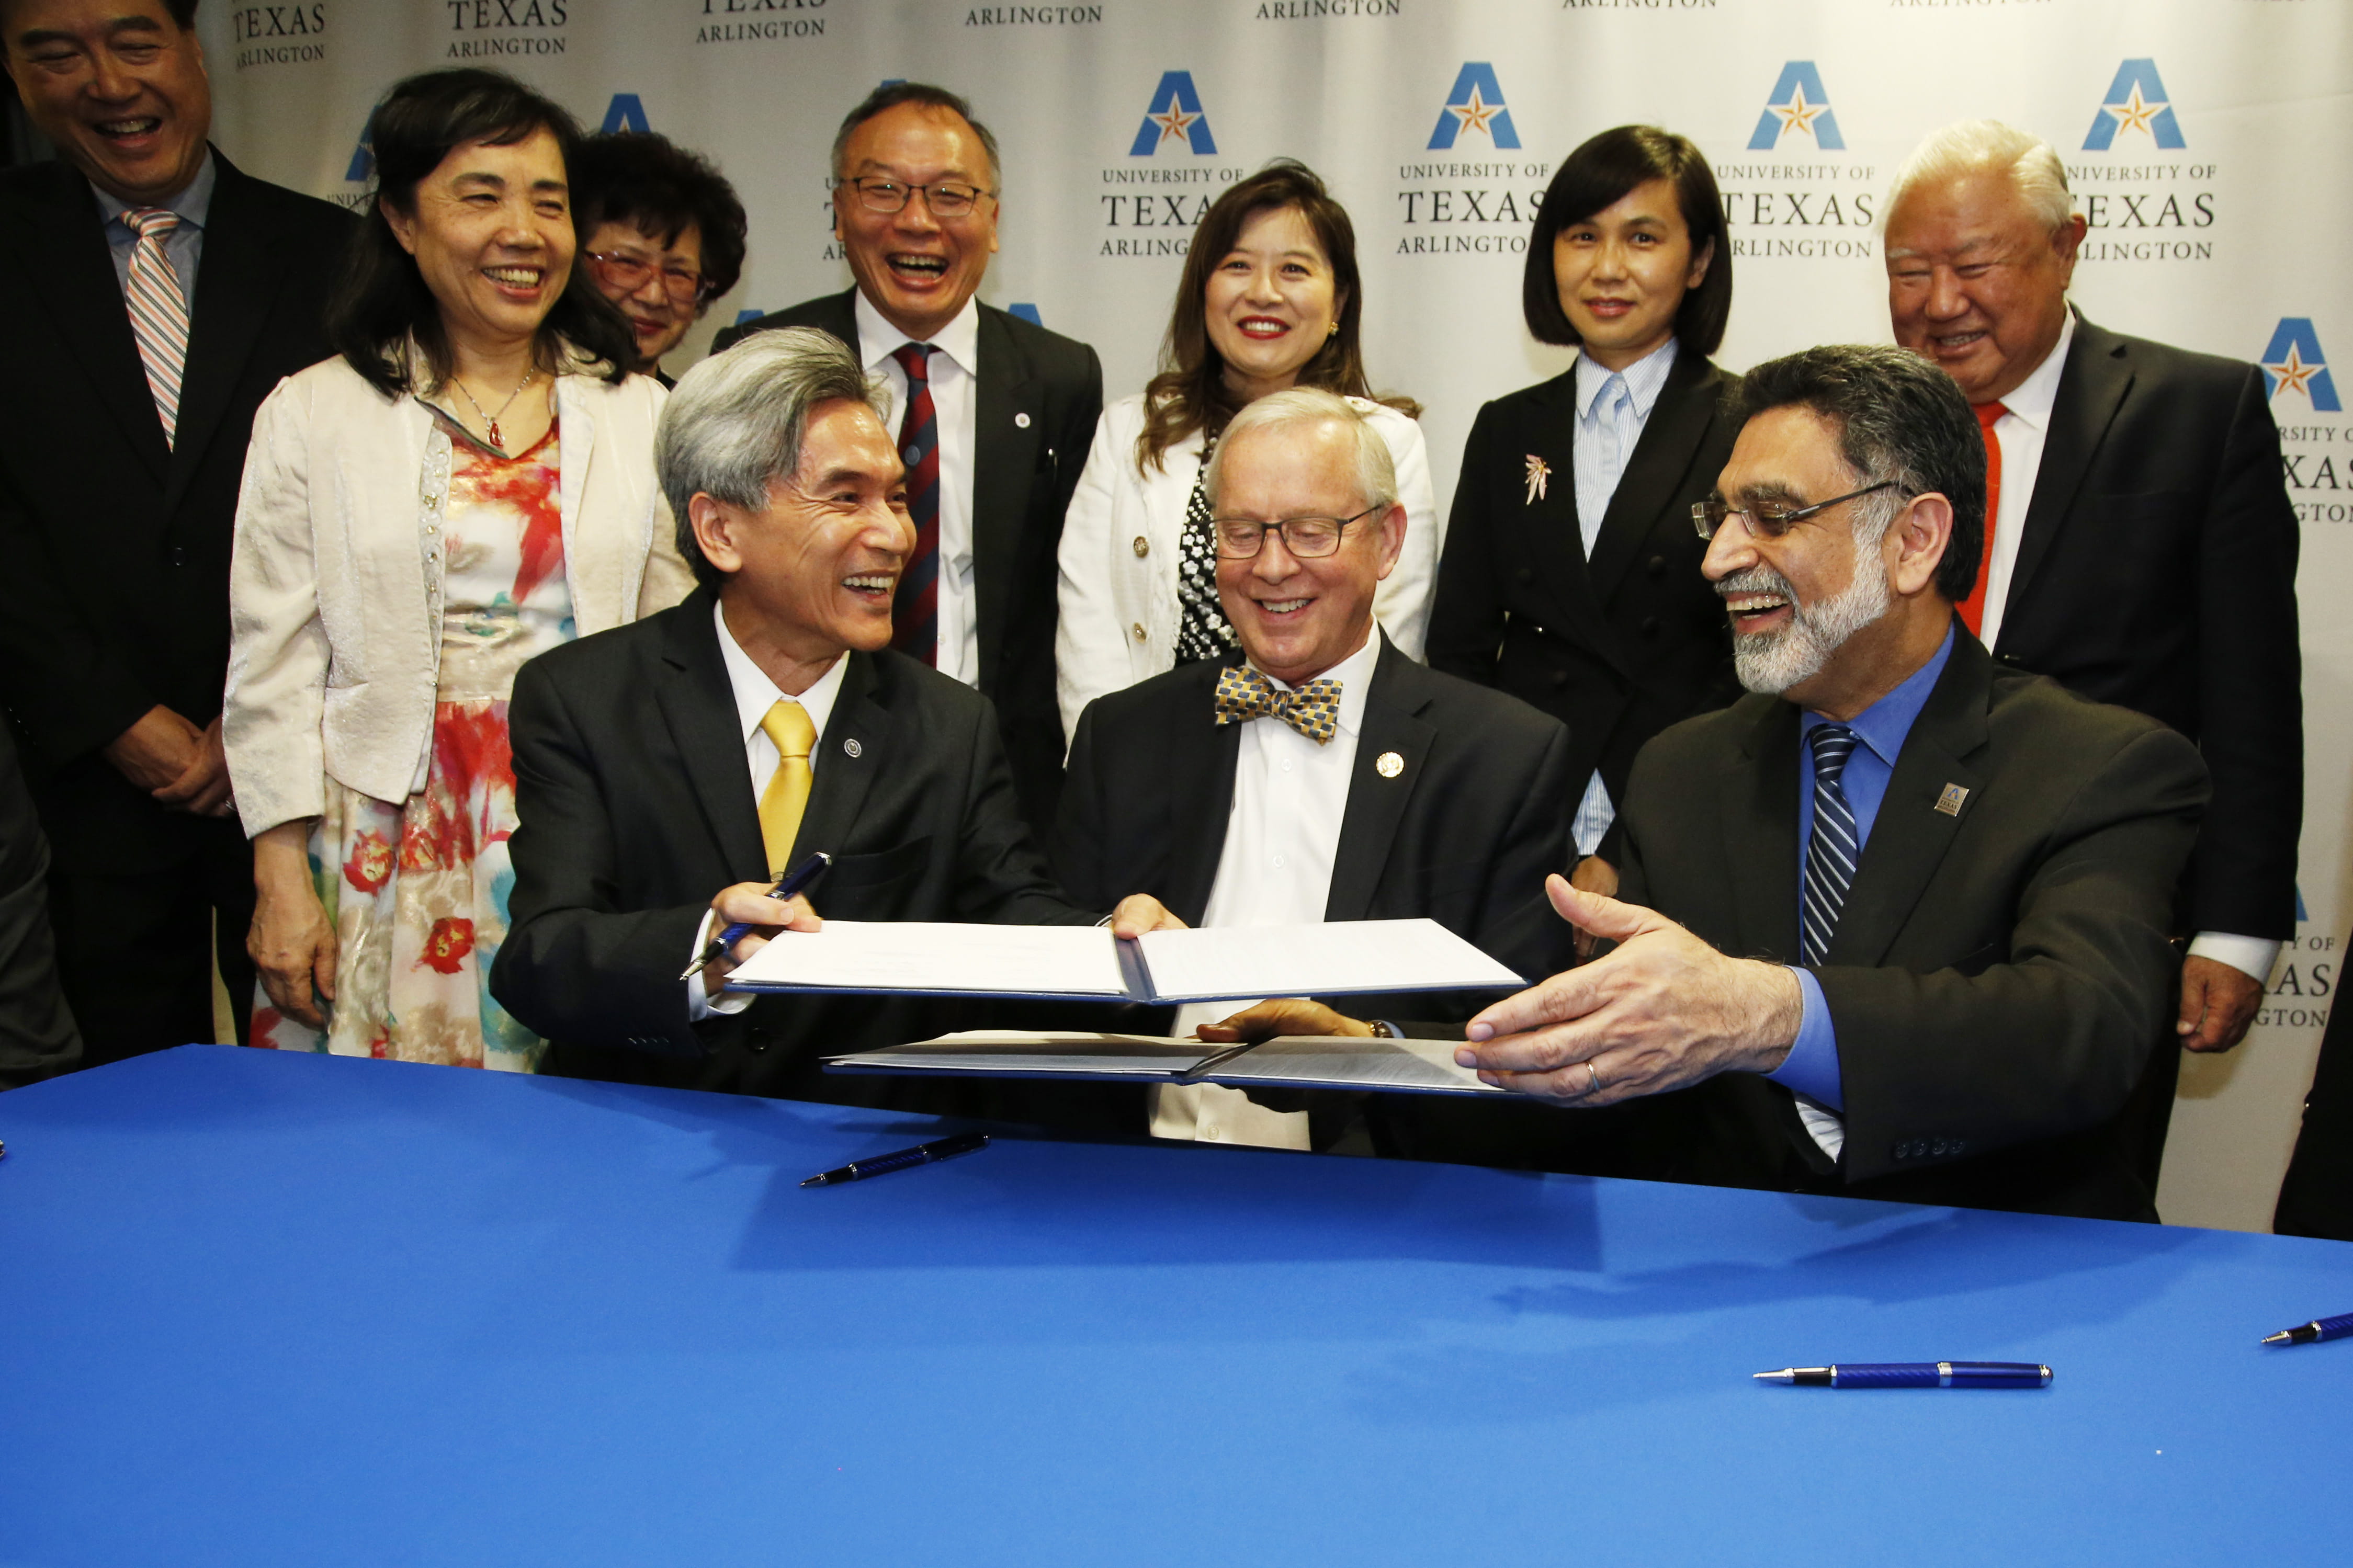 Officials from UTA and Taiwan’s National Chung Hsing University sign a memo of understanding.